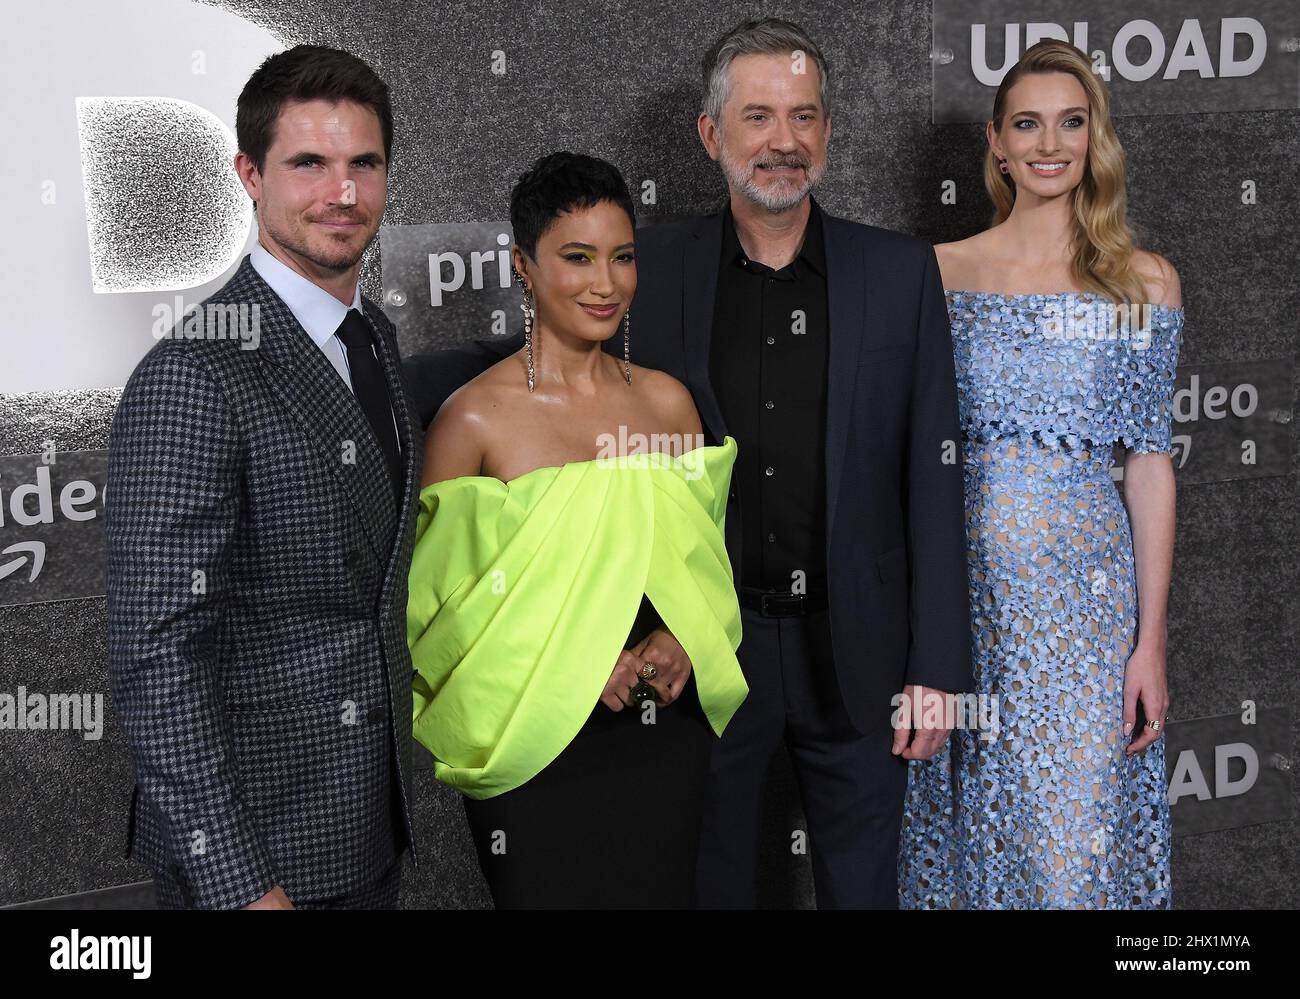 Los Angeles, USA. 08th Mar, 2022. (L-R) Robbie Amell, Andy Allo, Greg Daniels and Allegra Edwards at Amazon Prime Video's UPLOAD Season 2 Premiere held at The West Hollywood EDITION in West Hollywood, CA on Tuesday, ?March 8, 2022. (Photo By Sthanlee B. Mirador/Sipa USA) Credit: Sipa USA/Alamy Live News Stock Photo